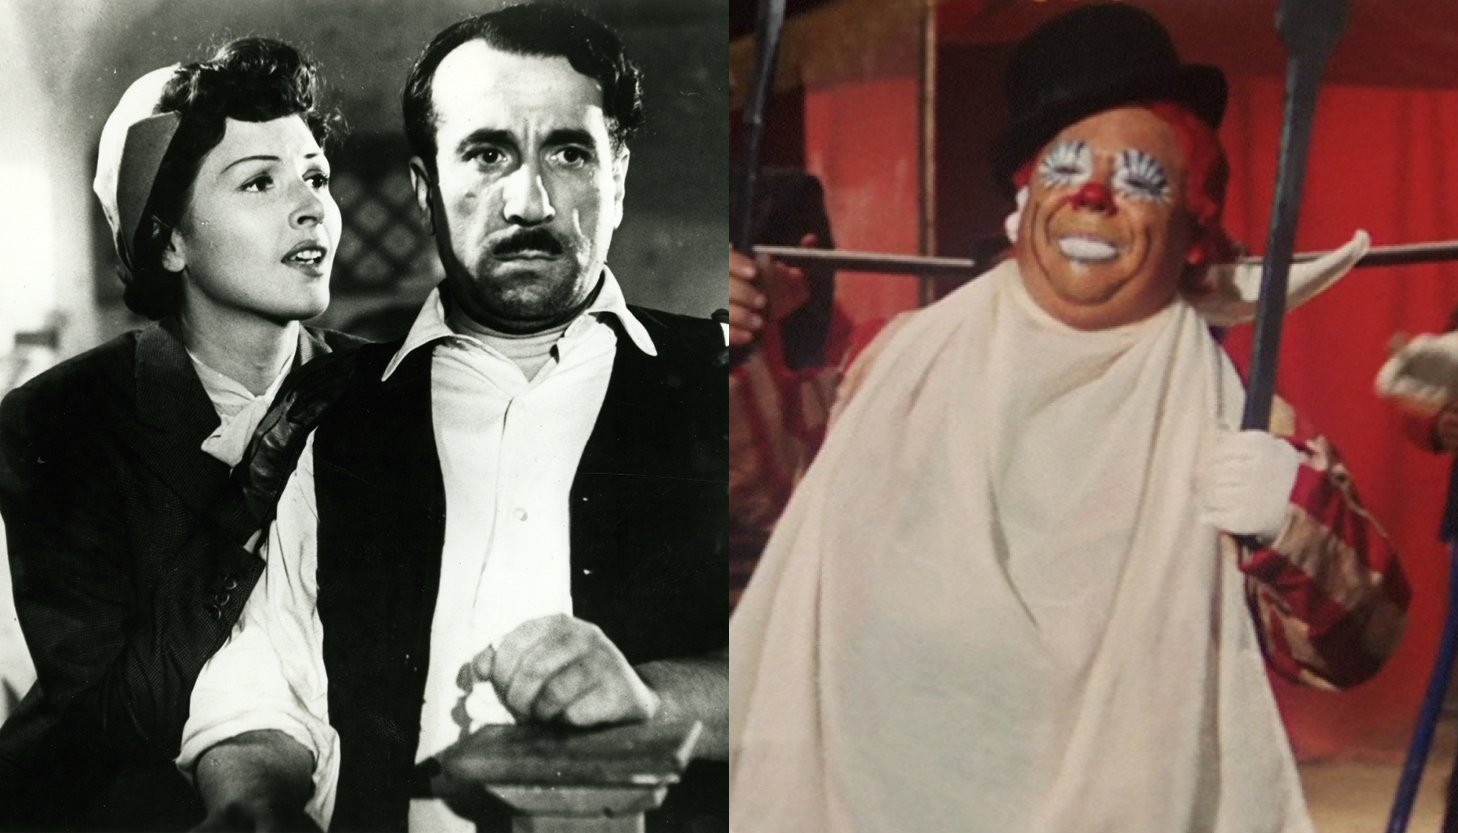 From left to right: Black-and-white still from Variety Lights featuring Lily (Carla Del Poggio) and Checco (Peppino De Filippo). Lily has her hands, which are covered in black gloves, on Checco’s shoulders as he looks straight ahead. Still from I clowns featuring a person wearing a clown mask, a black hat, and a white cloth tied around their neck. They are holding metal rods in each hand.